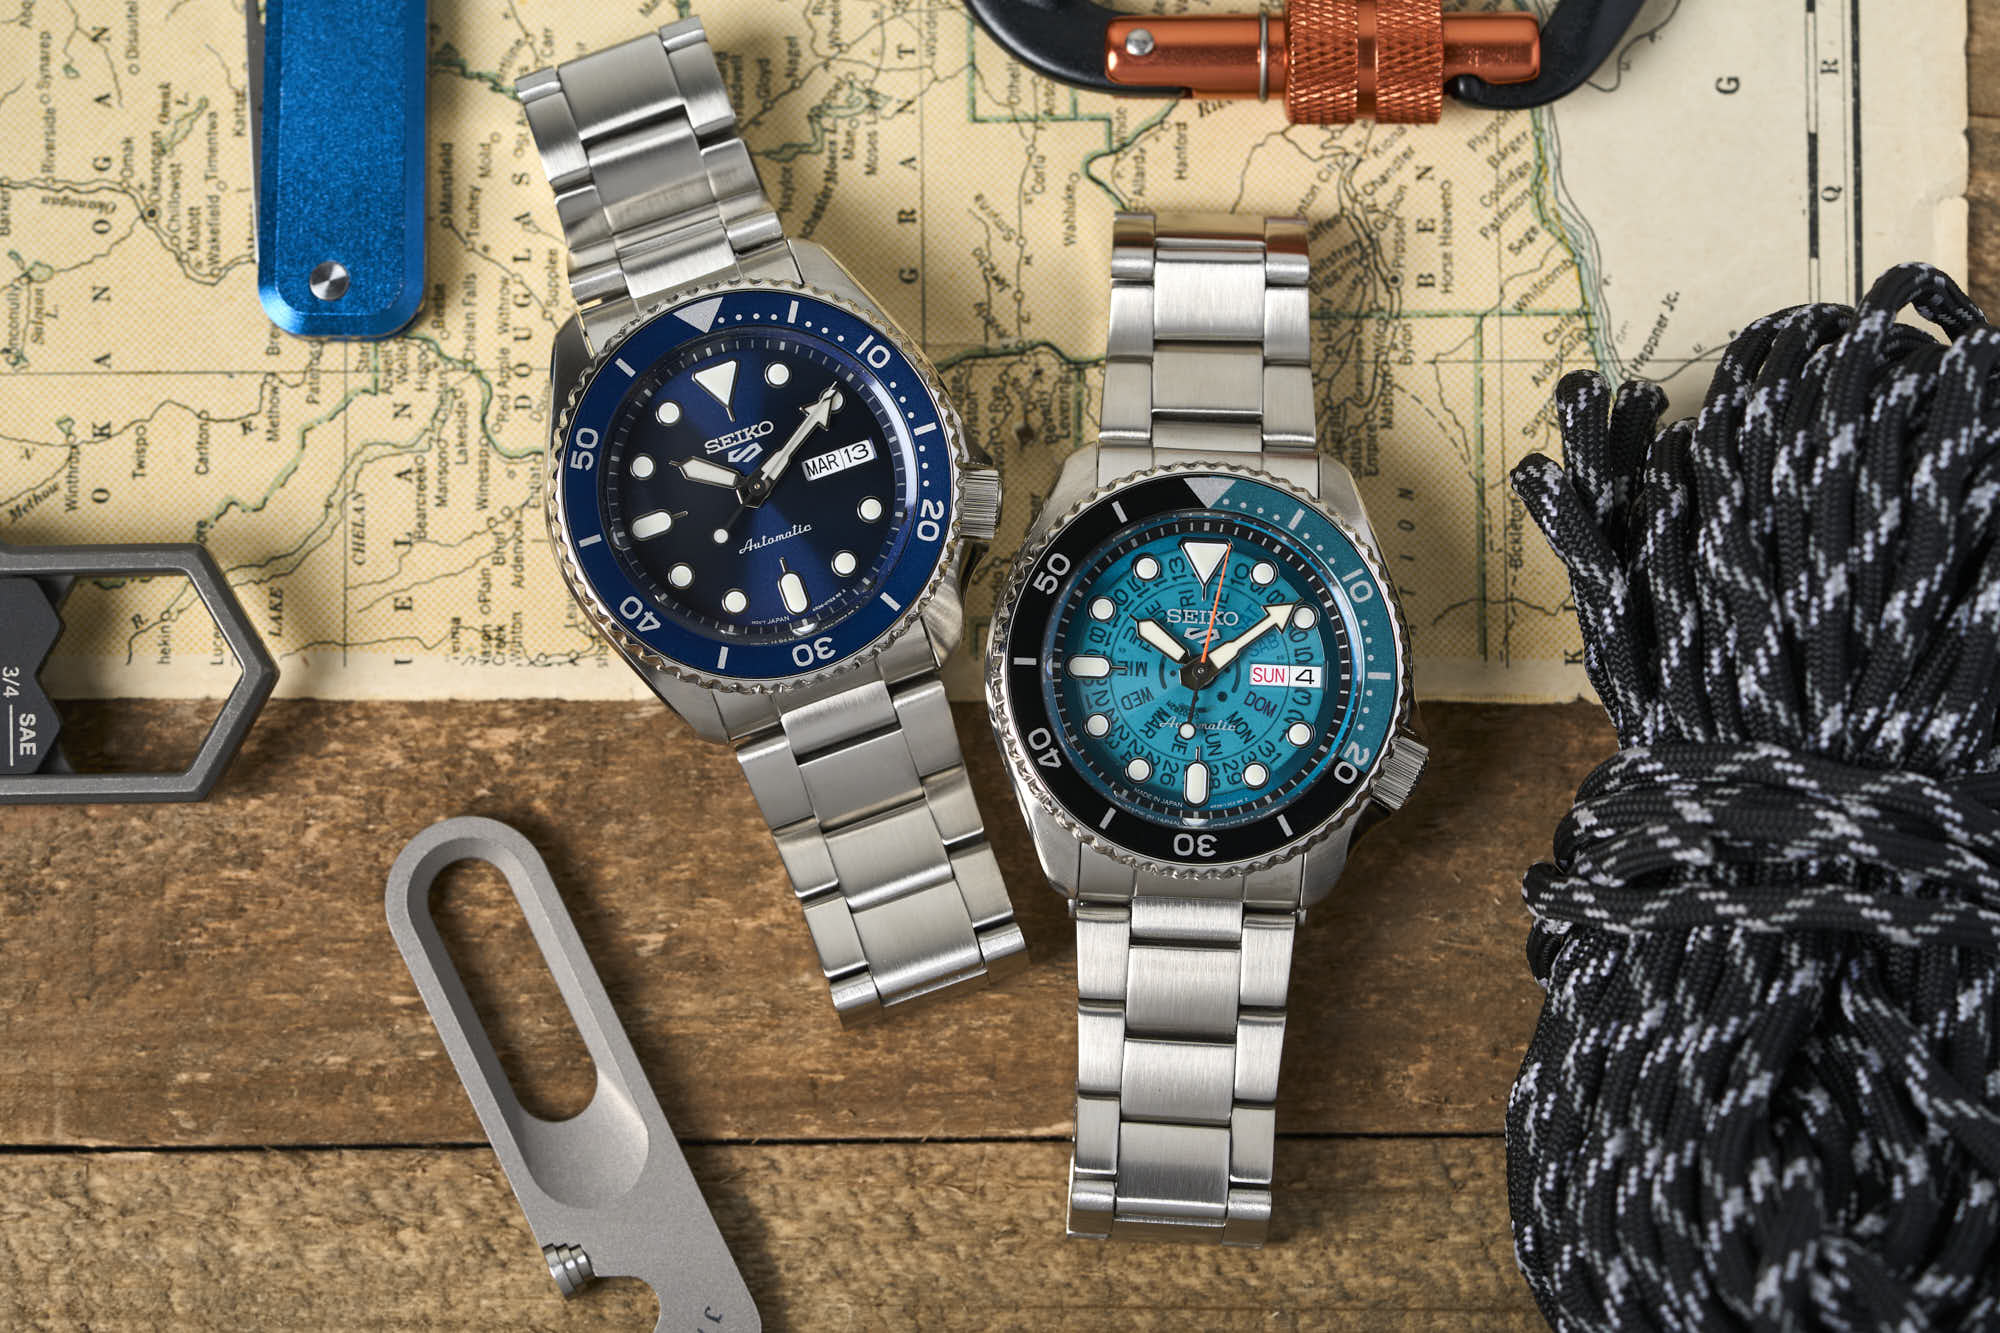 Now in the Shop: Two Dive-style Watches from Seiko For Daily Wear